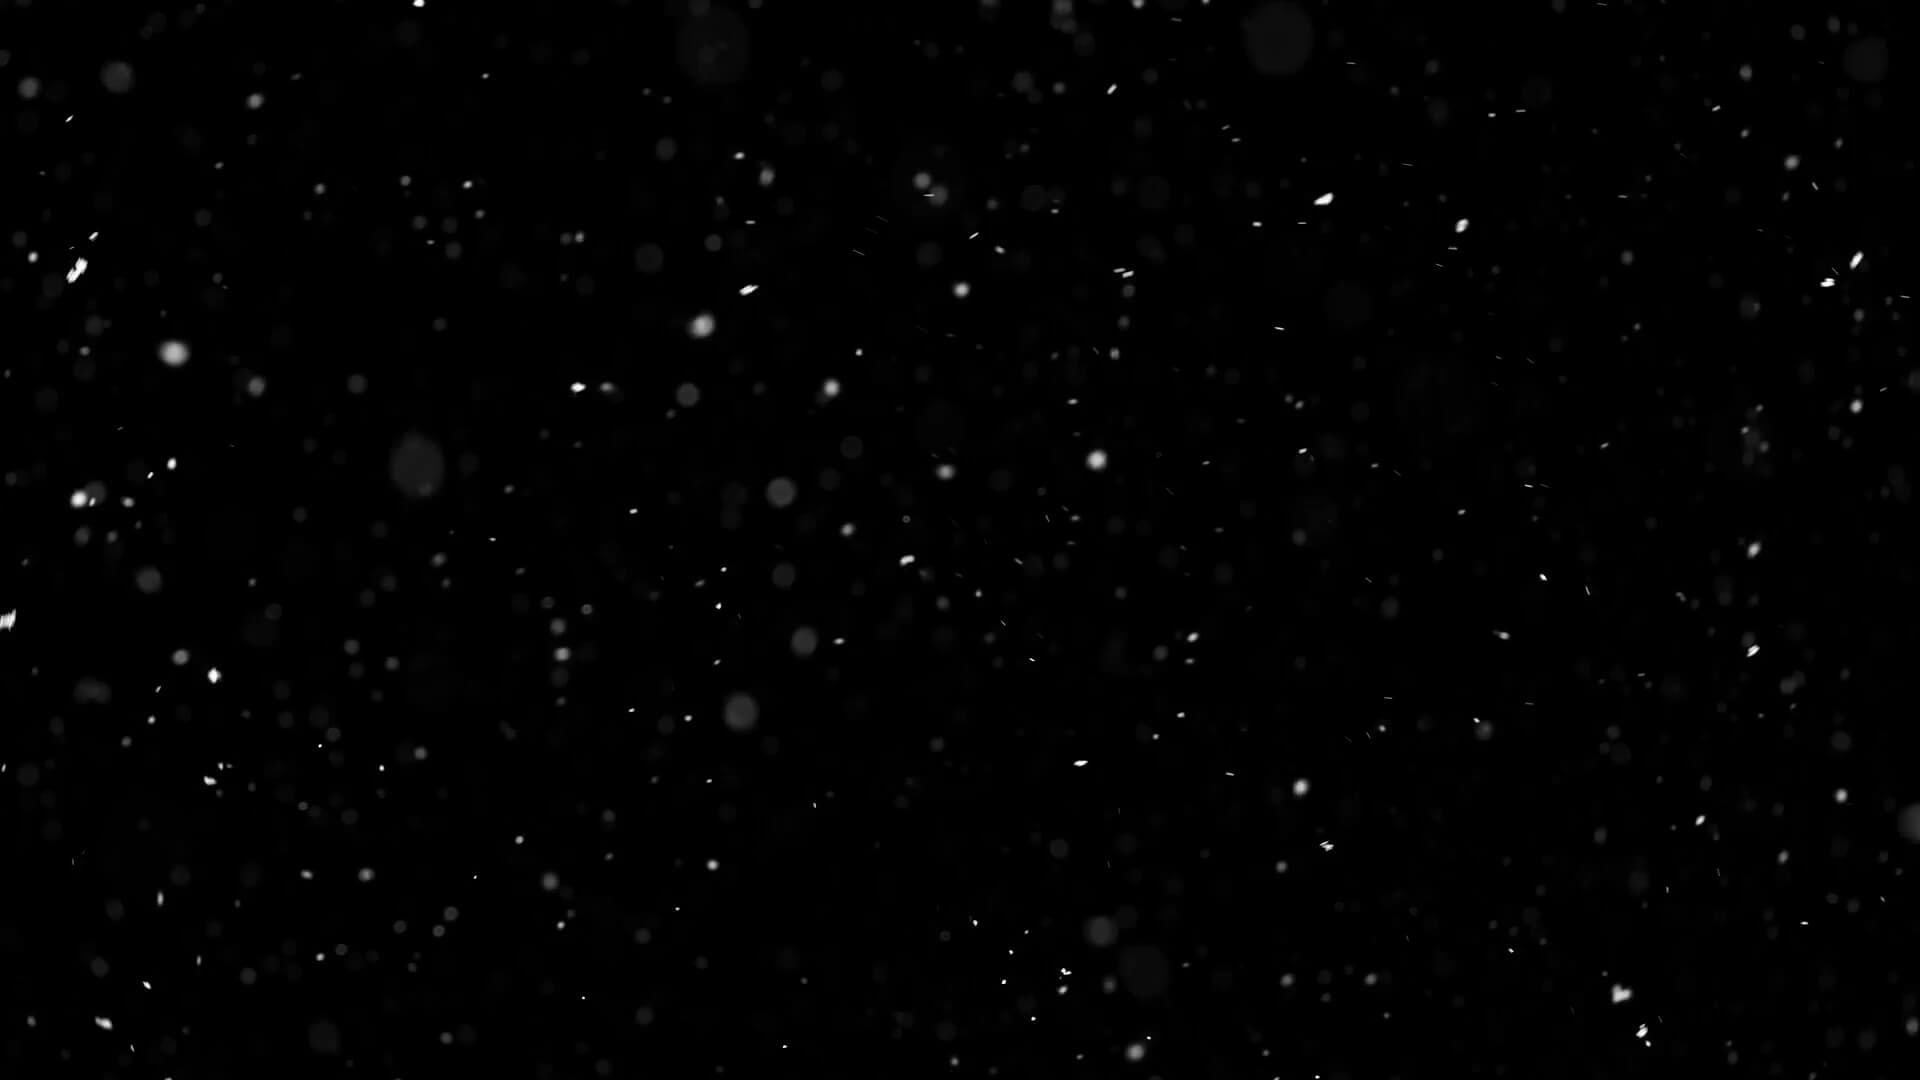 Free snow overlay 469484639 from Adobe Stock.